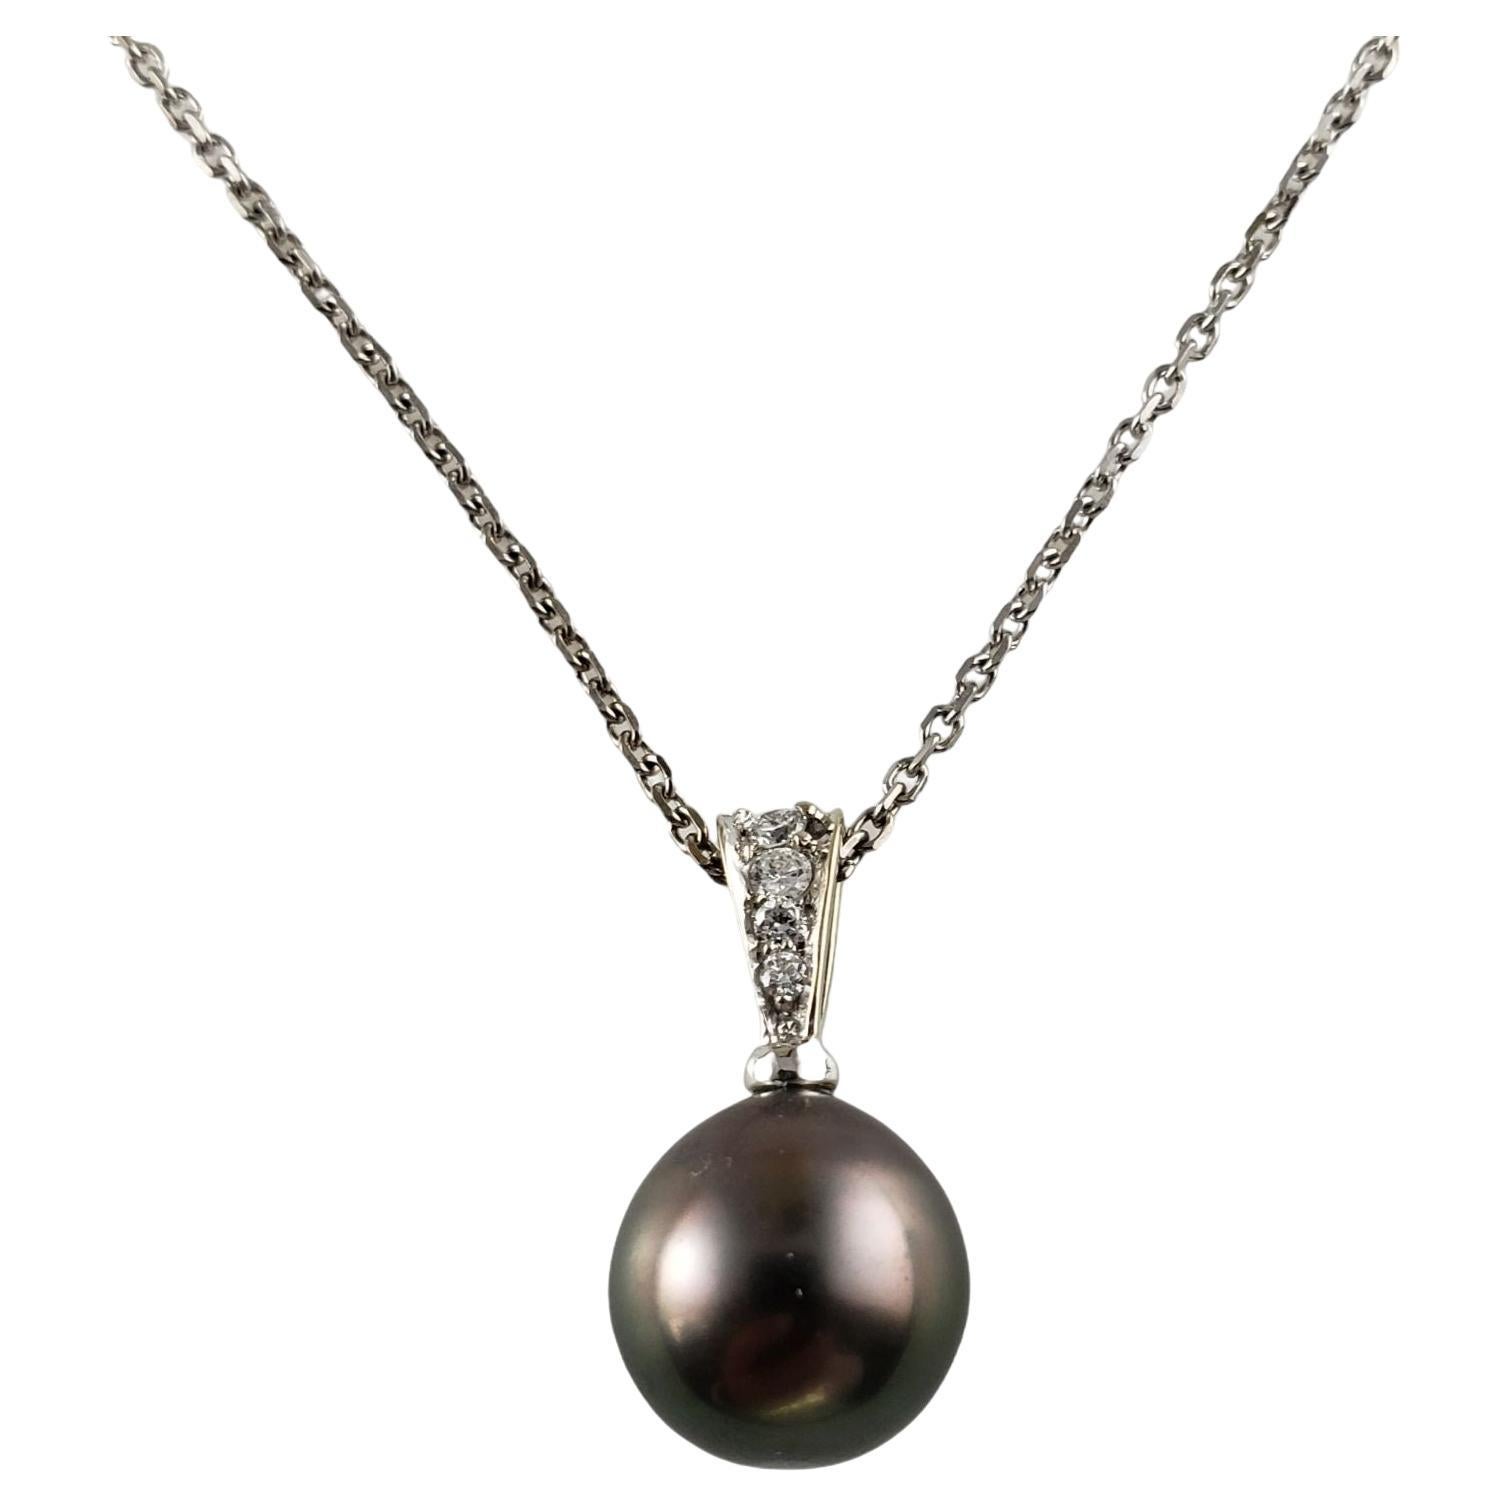 18K/14K White Gold and Diamond Black Pearl Pendant Necklace #14139 For Sale